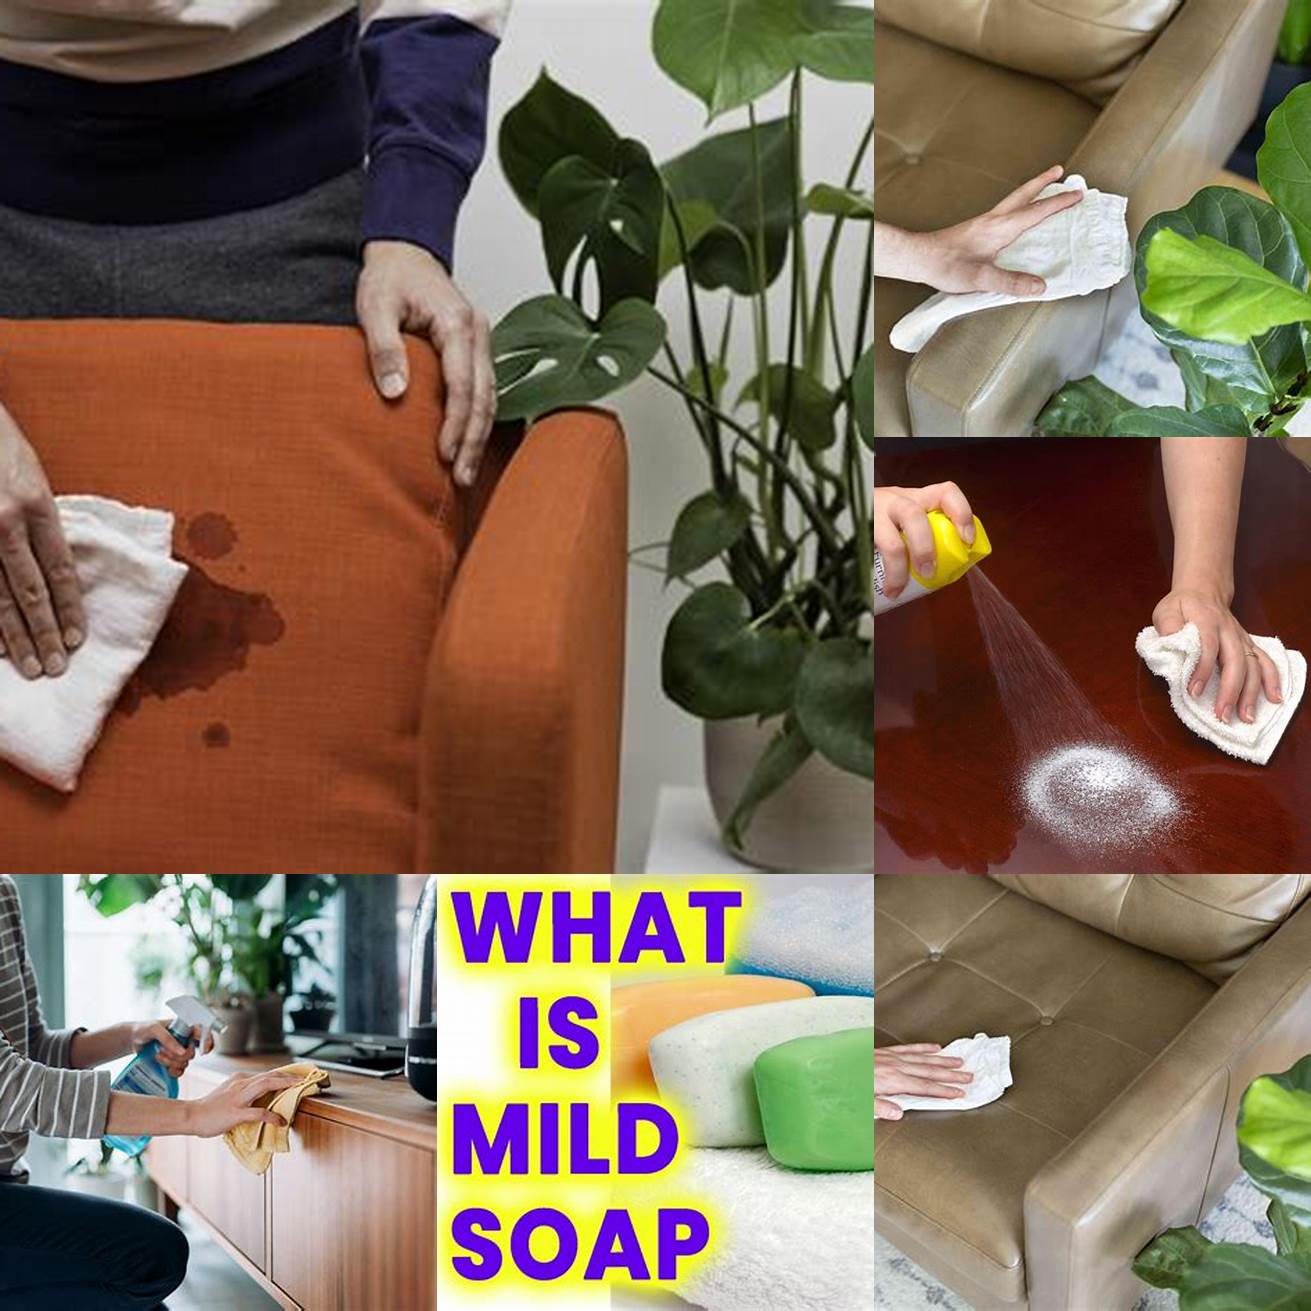 Wash the furniture with mild soap